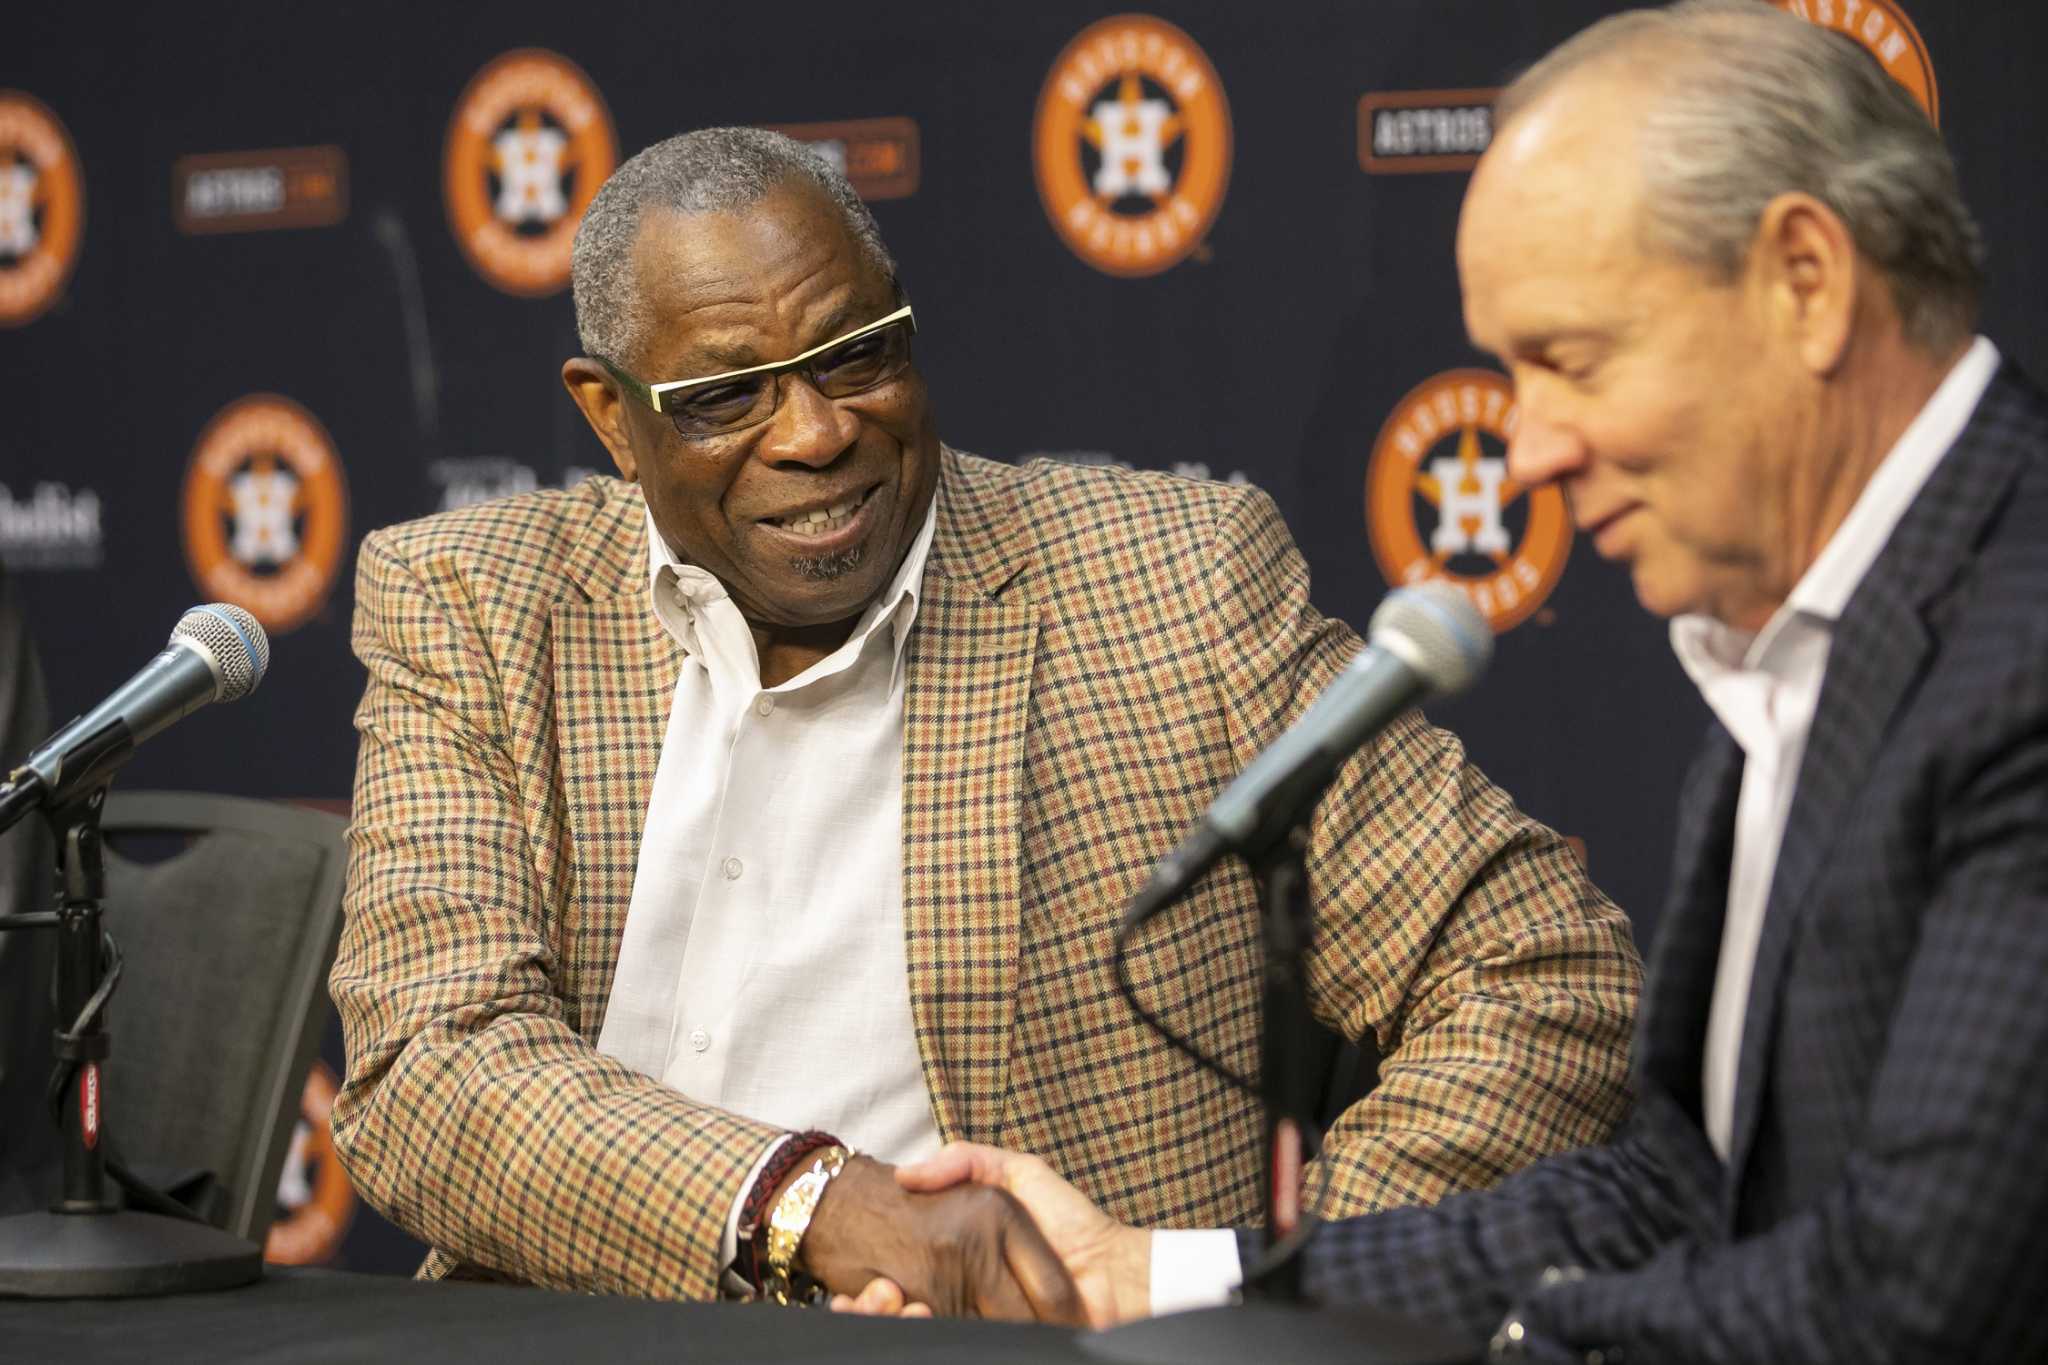 Astros manager Dusty Baker contemplative on retirement